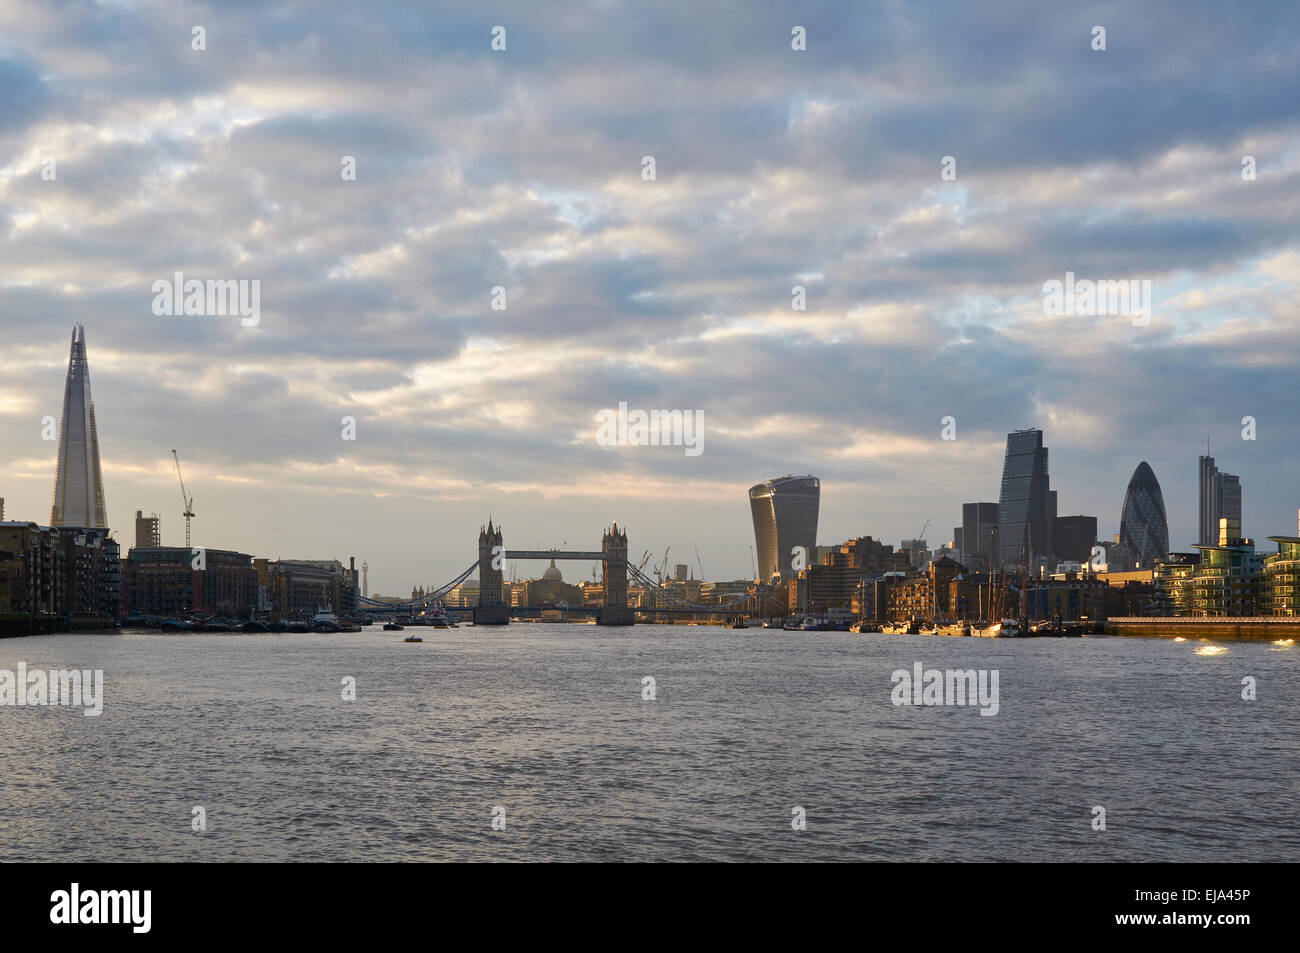 London skyline from Bermondsey, with river Thames, Tower Bridge and the ...